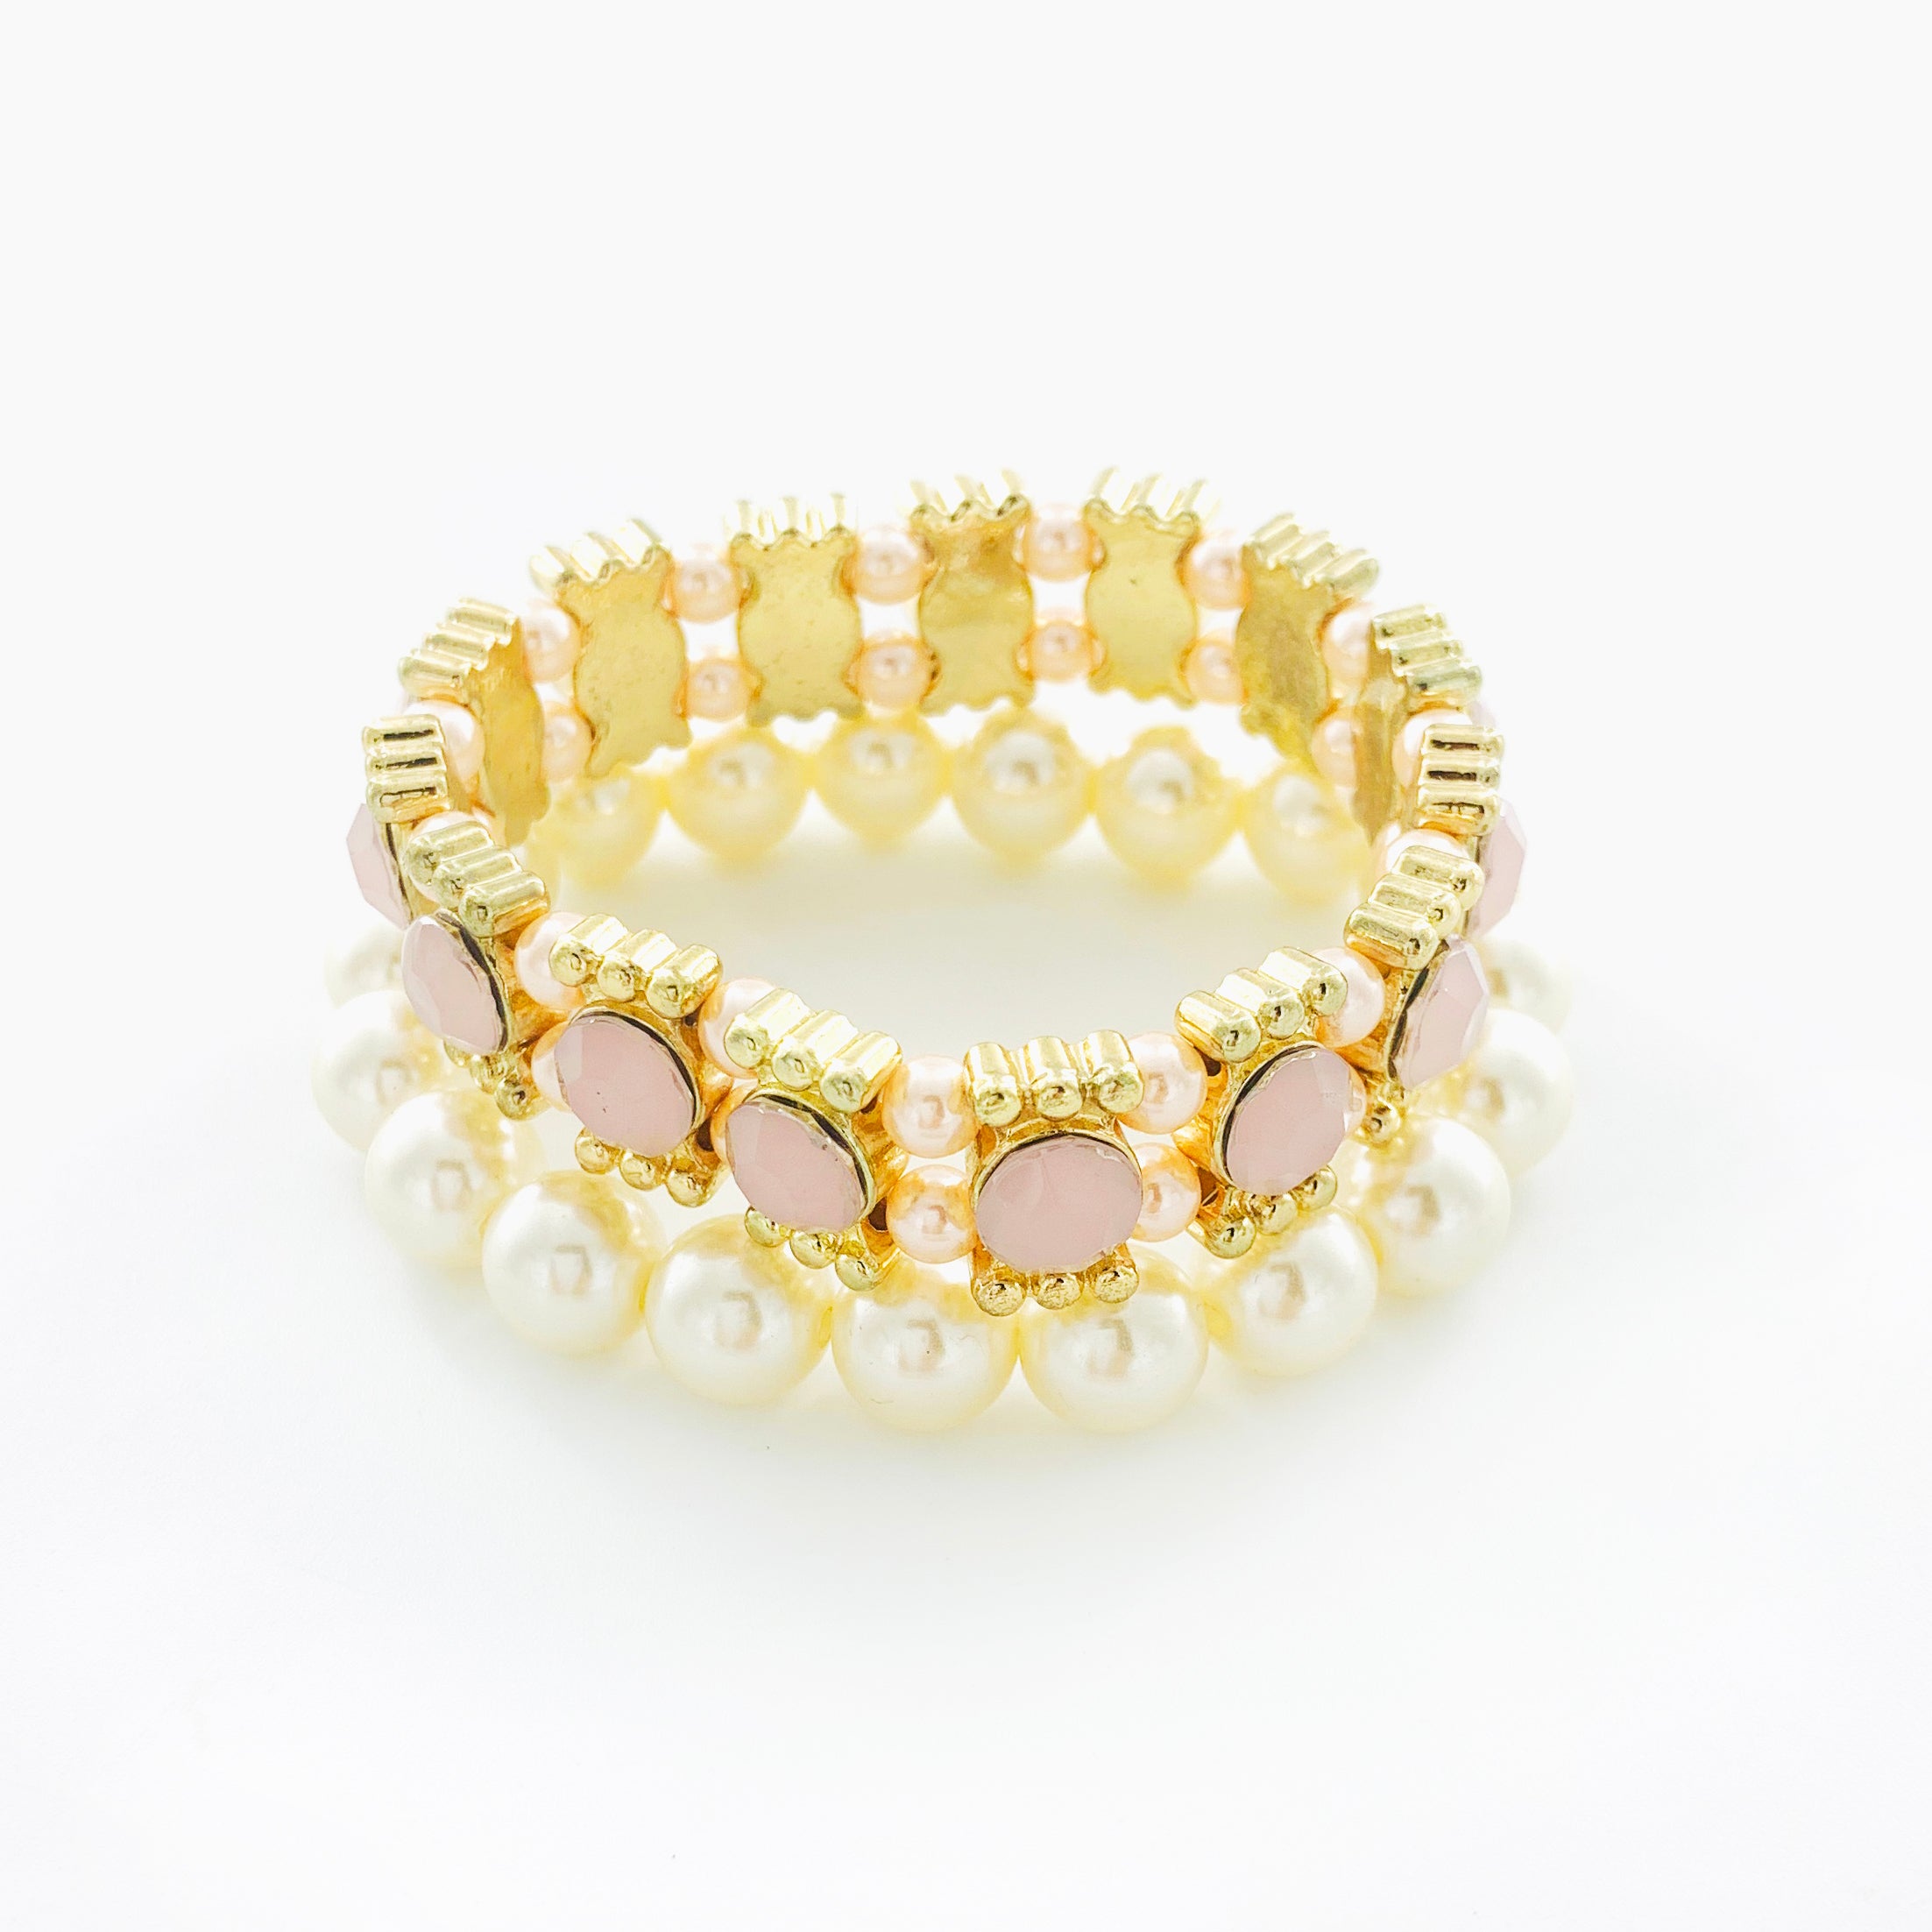 Elastic Bracelet with pearls and pink stones